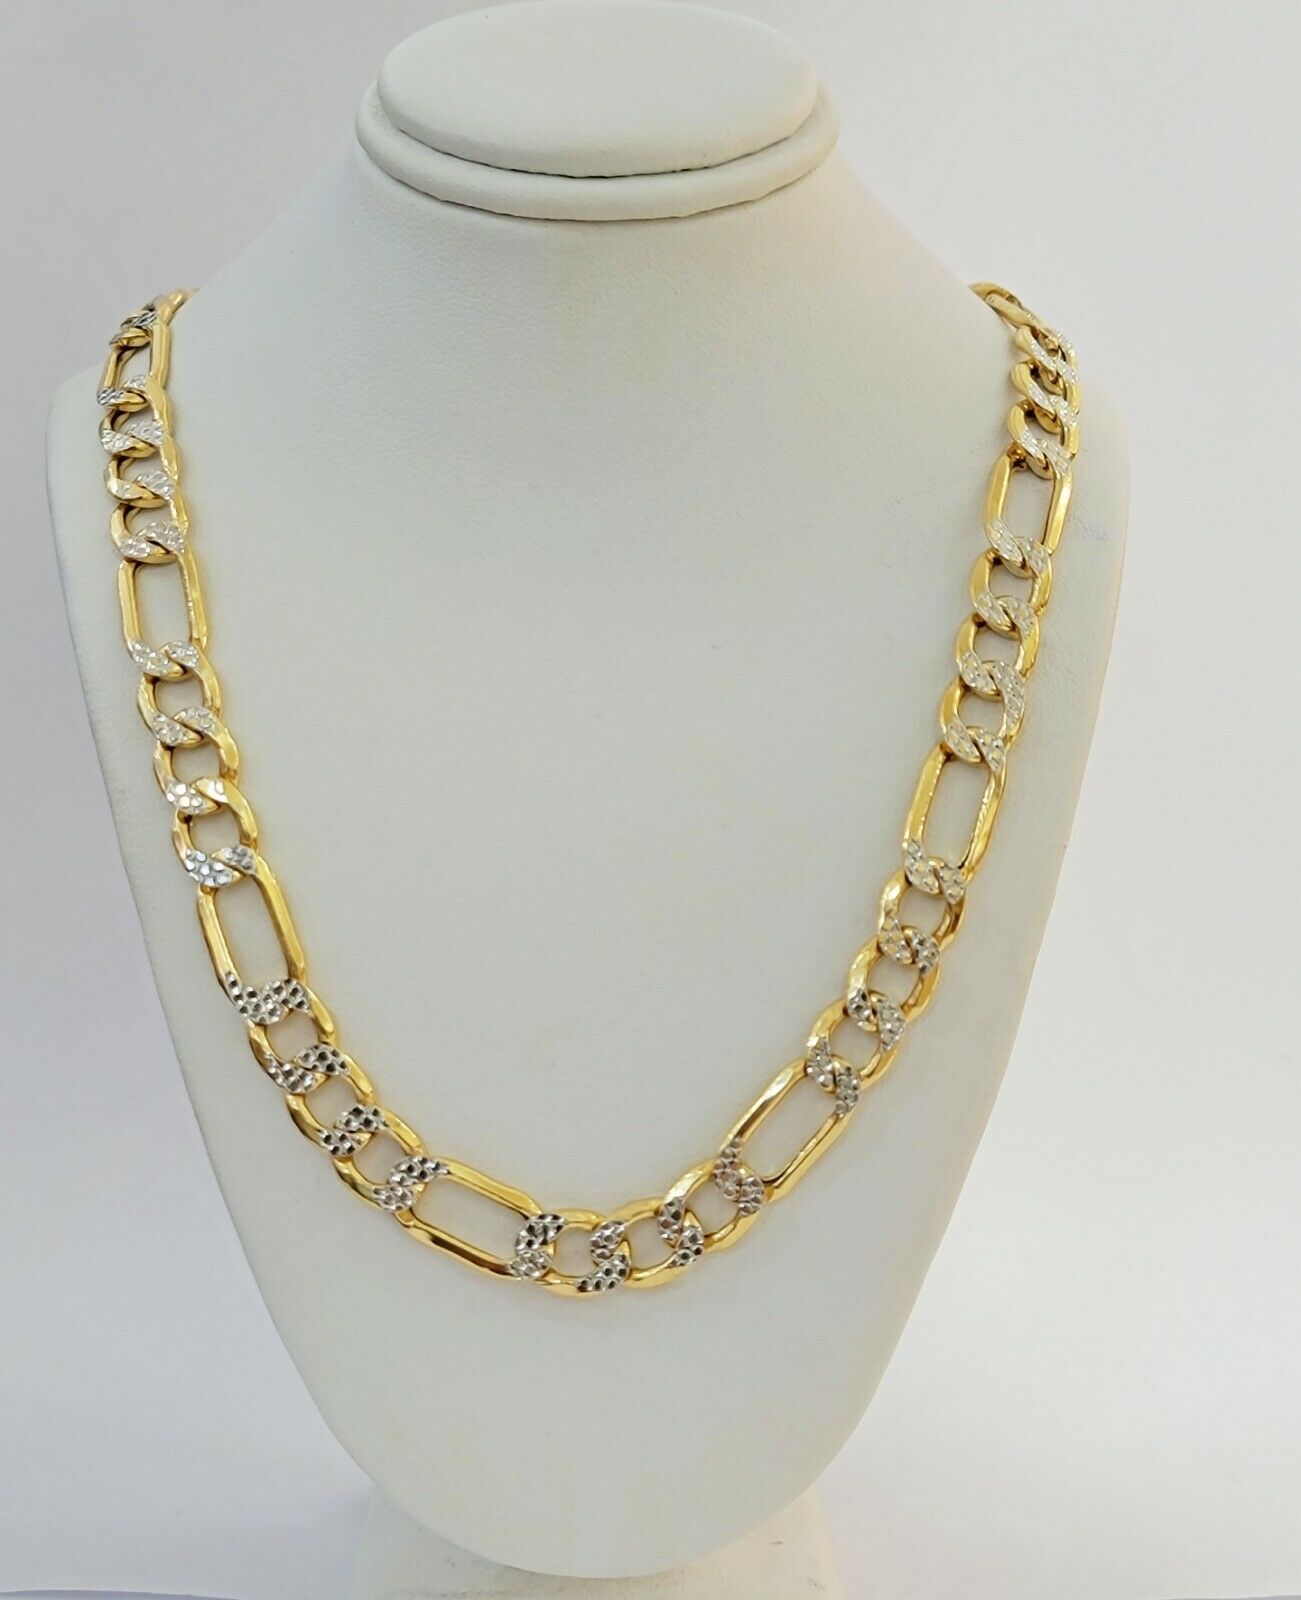 Real Gold 10k Figaro Necklace Men's Chain 9mm 24" Inch Yellow Gold Diamond Cuts